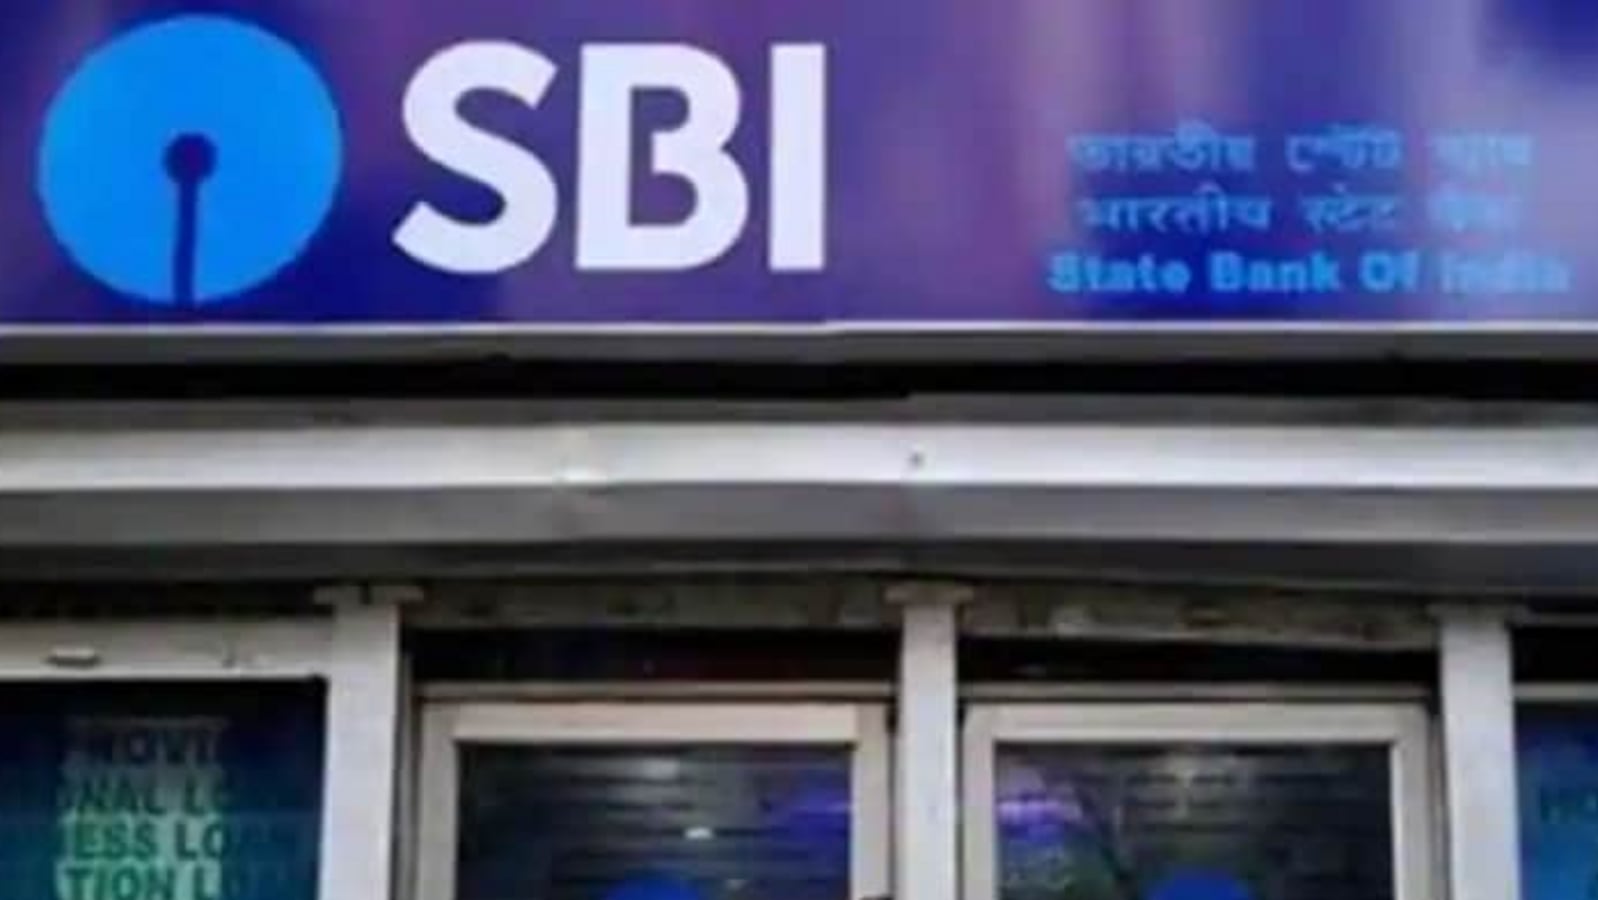 Sbi Hikes Mclr By Up To 15 Basis Points Across Tenors Hindustan Times 9103